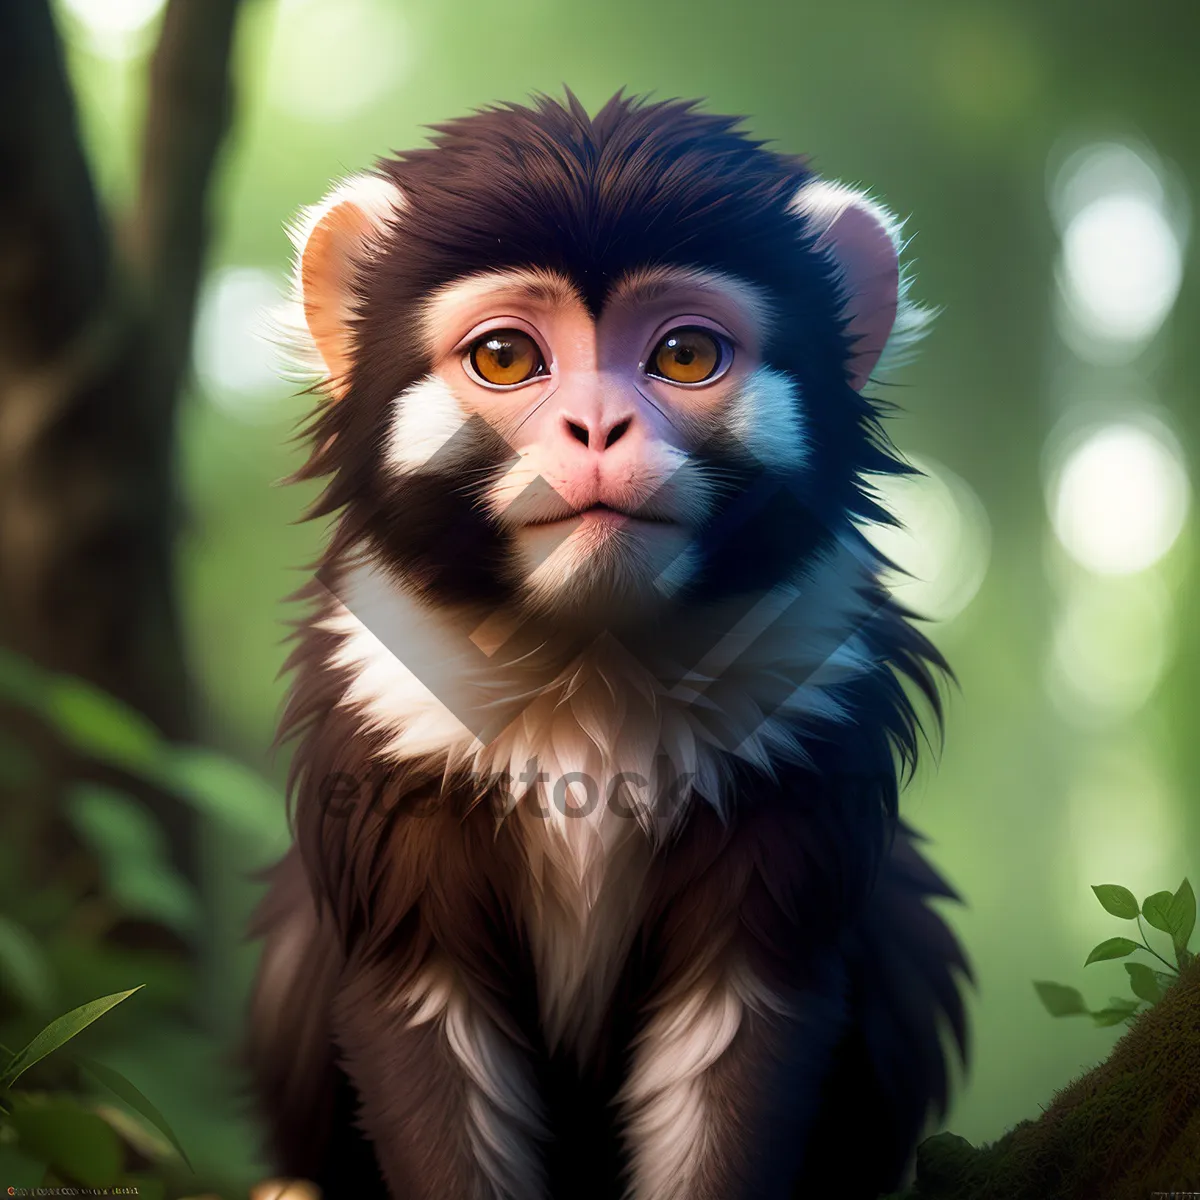 Picture of Playful Primate Portrait: A Cute Monkey with Expressive Eyes